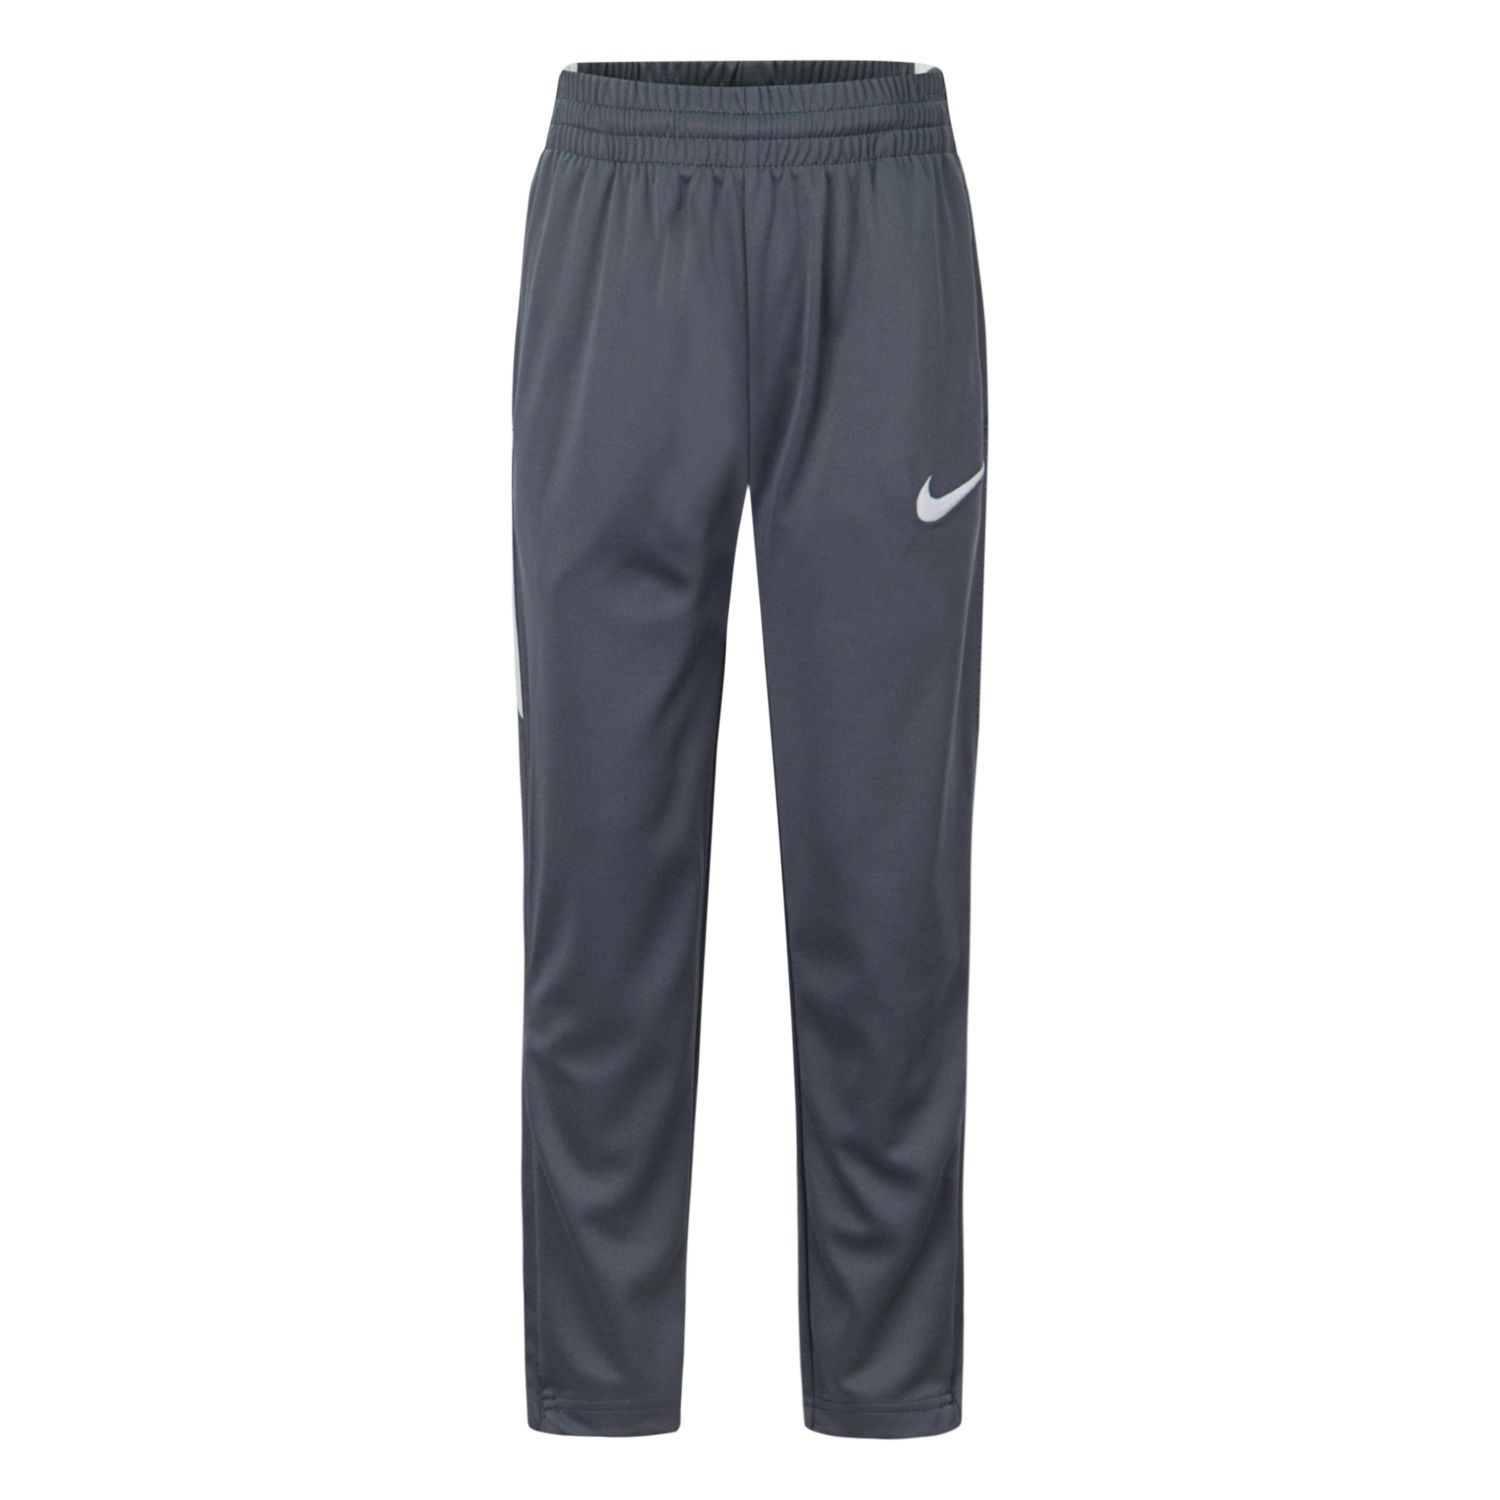 nike pants with zipper at ankle